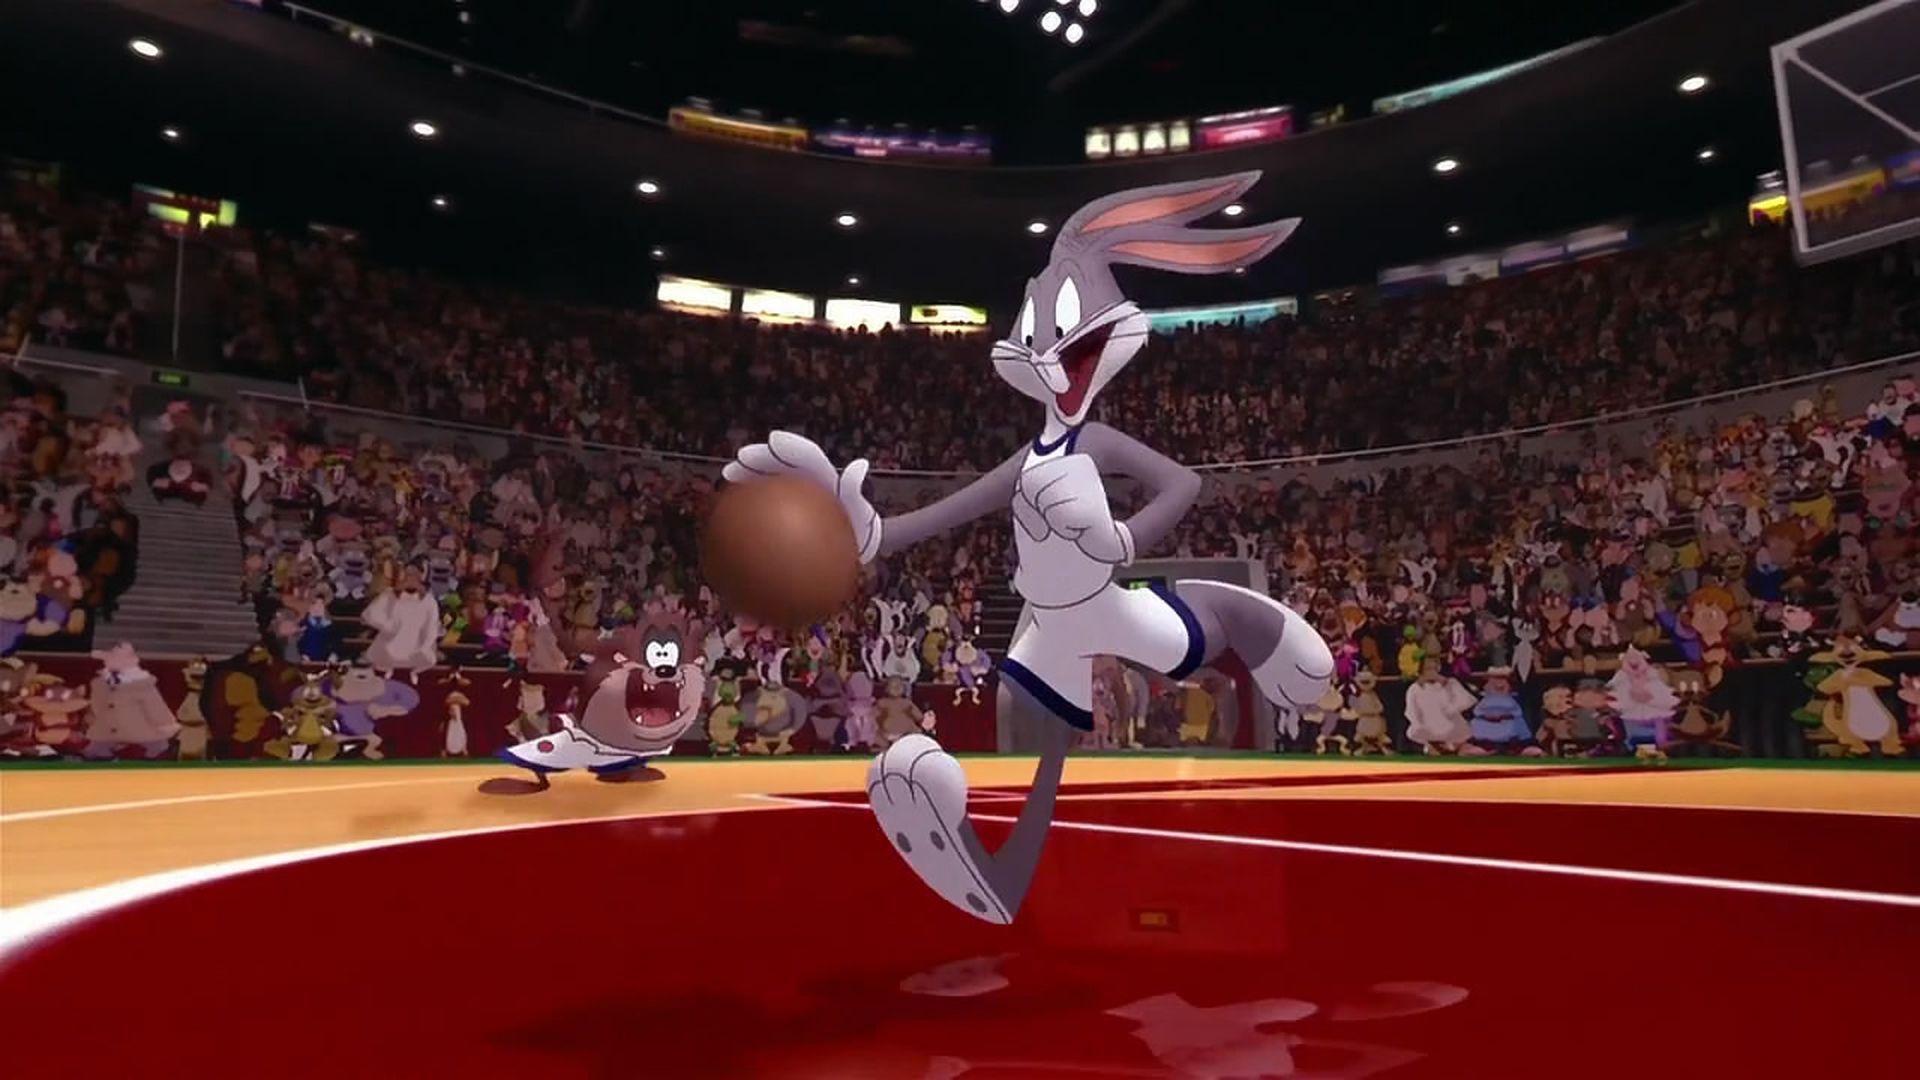 A Sequel To The Looney Tunes Movie Space Jam Is In The Works With